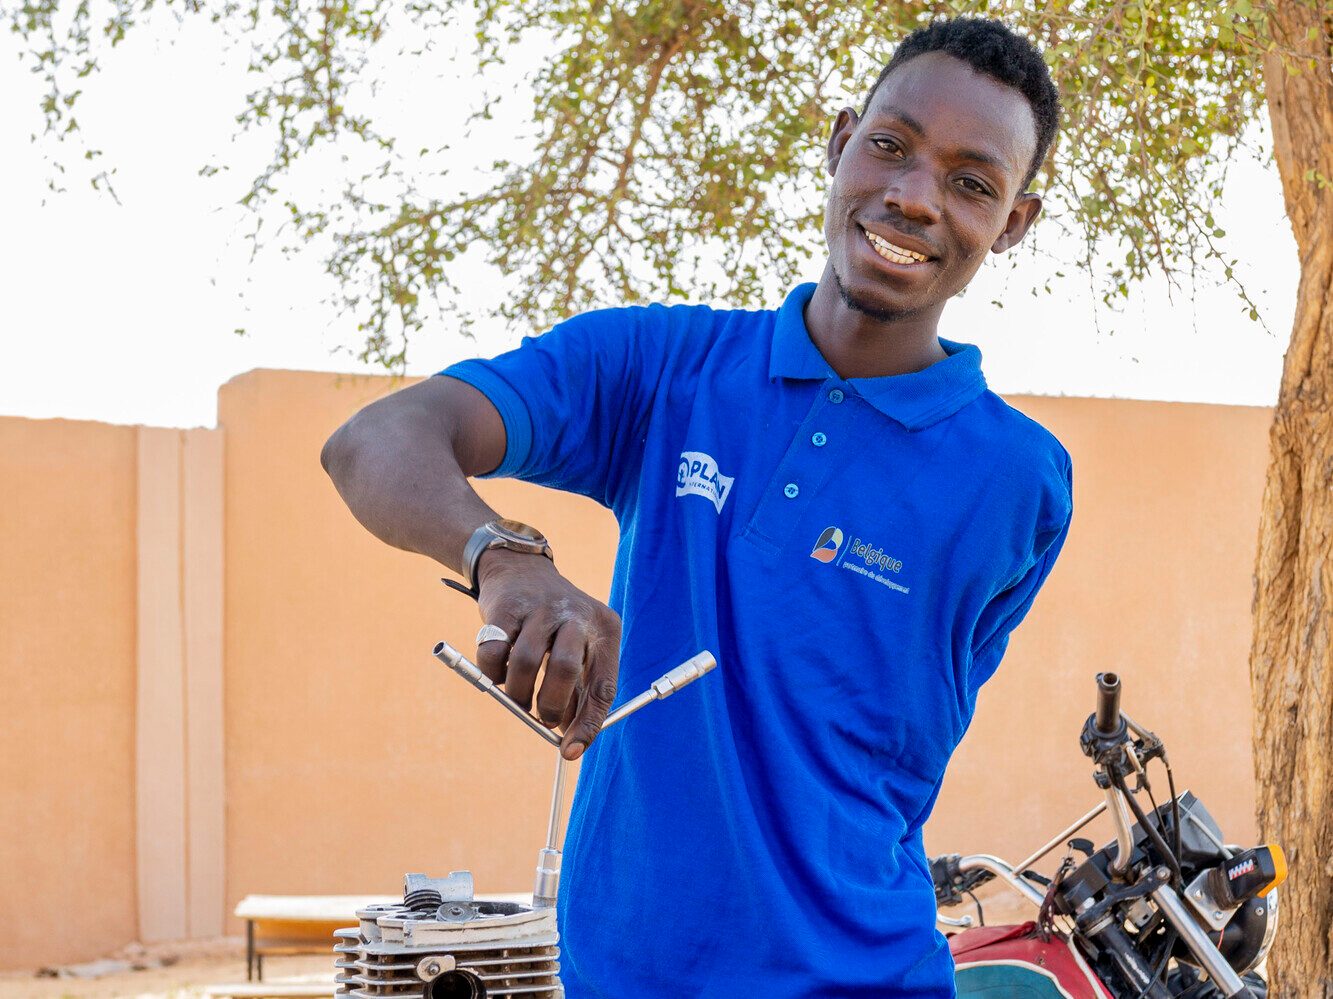 Lawali holding a tool used for repairing a motorcycle